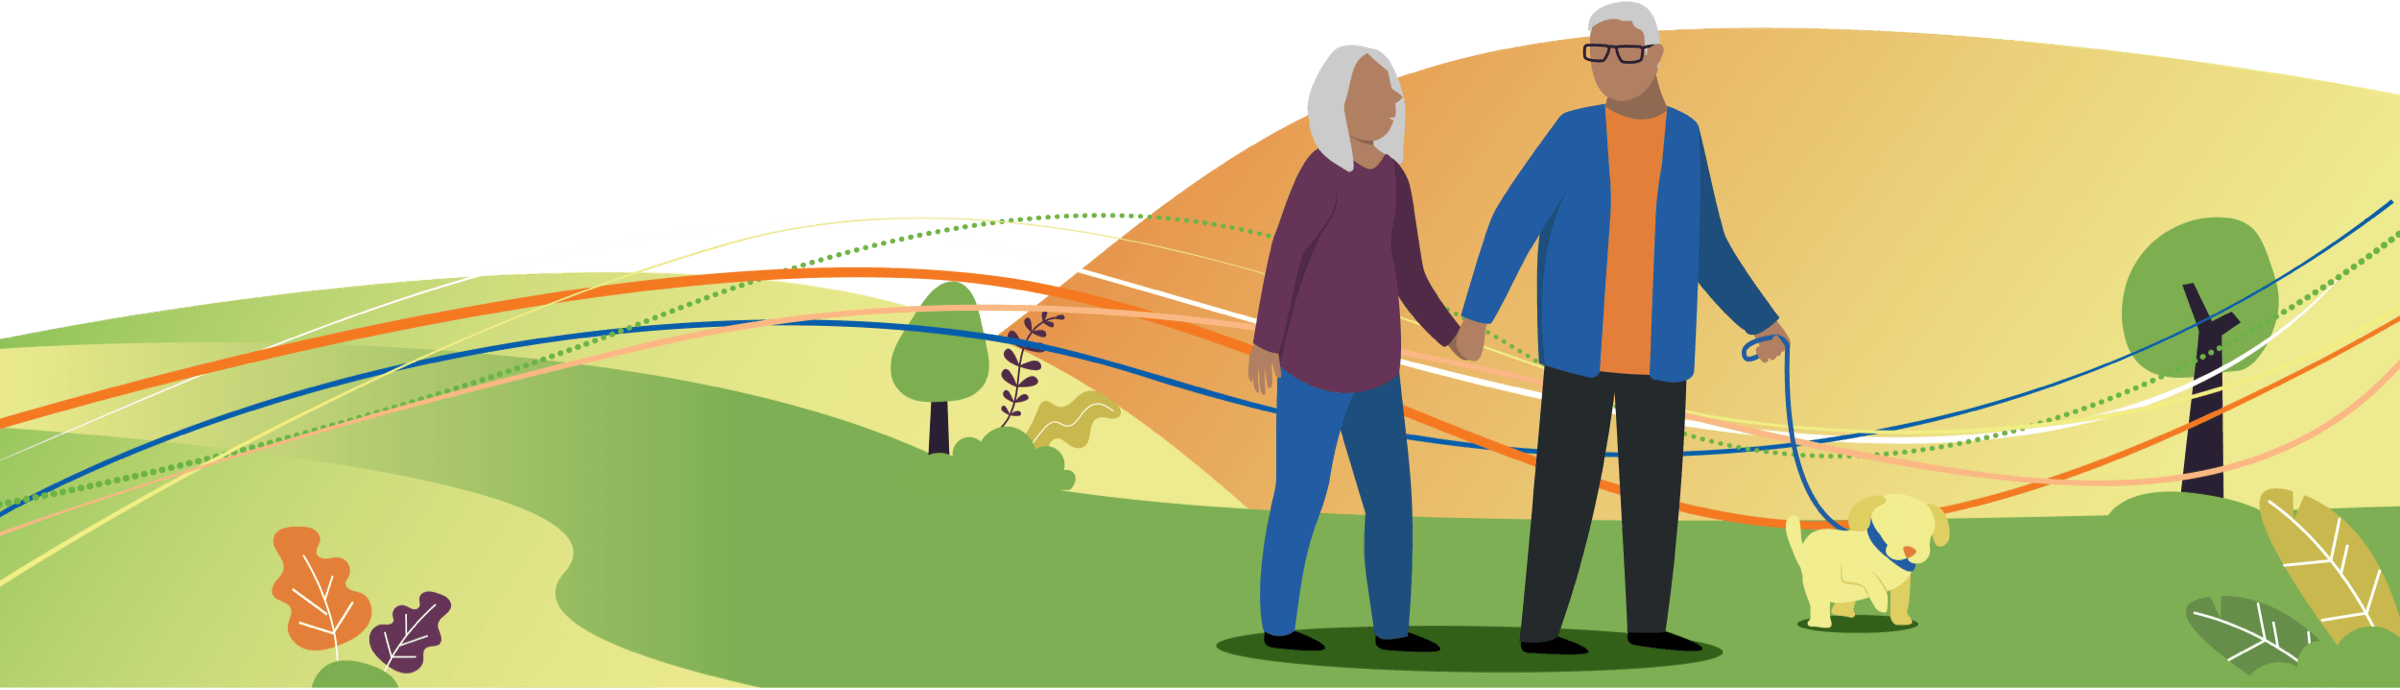 Graphic of a man and woman walking and holding hands